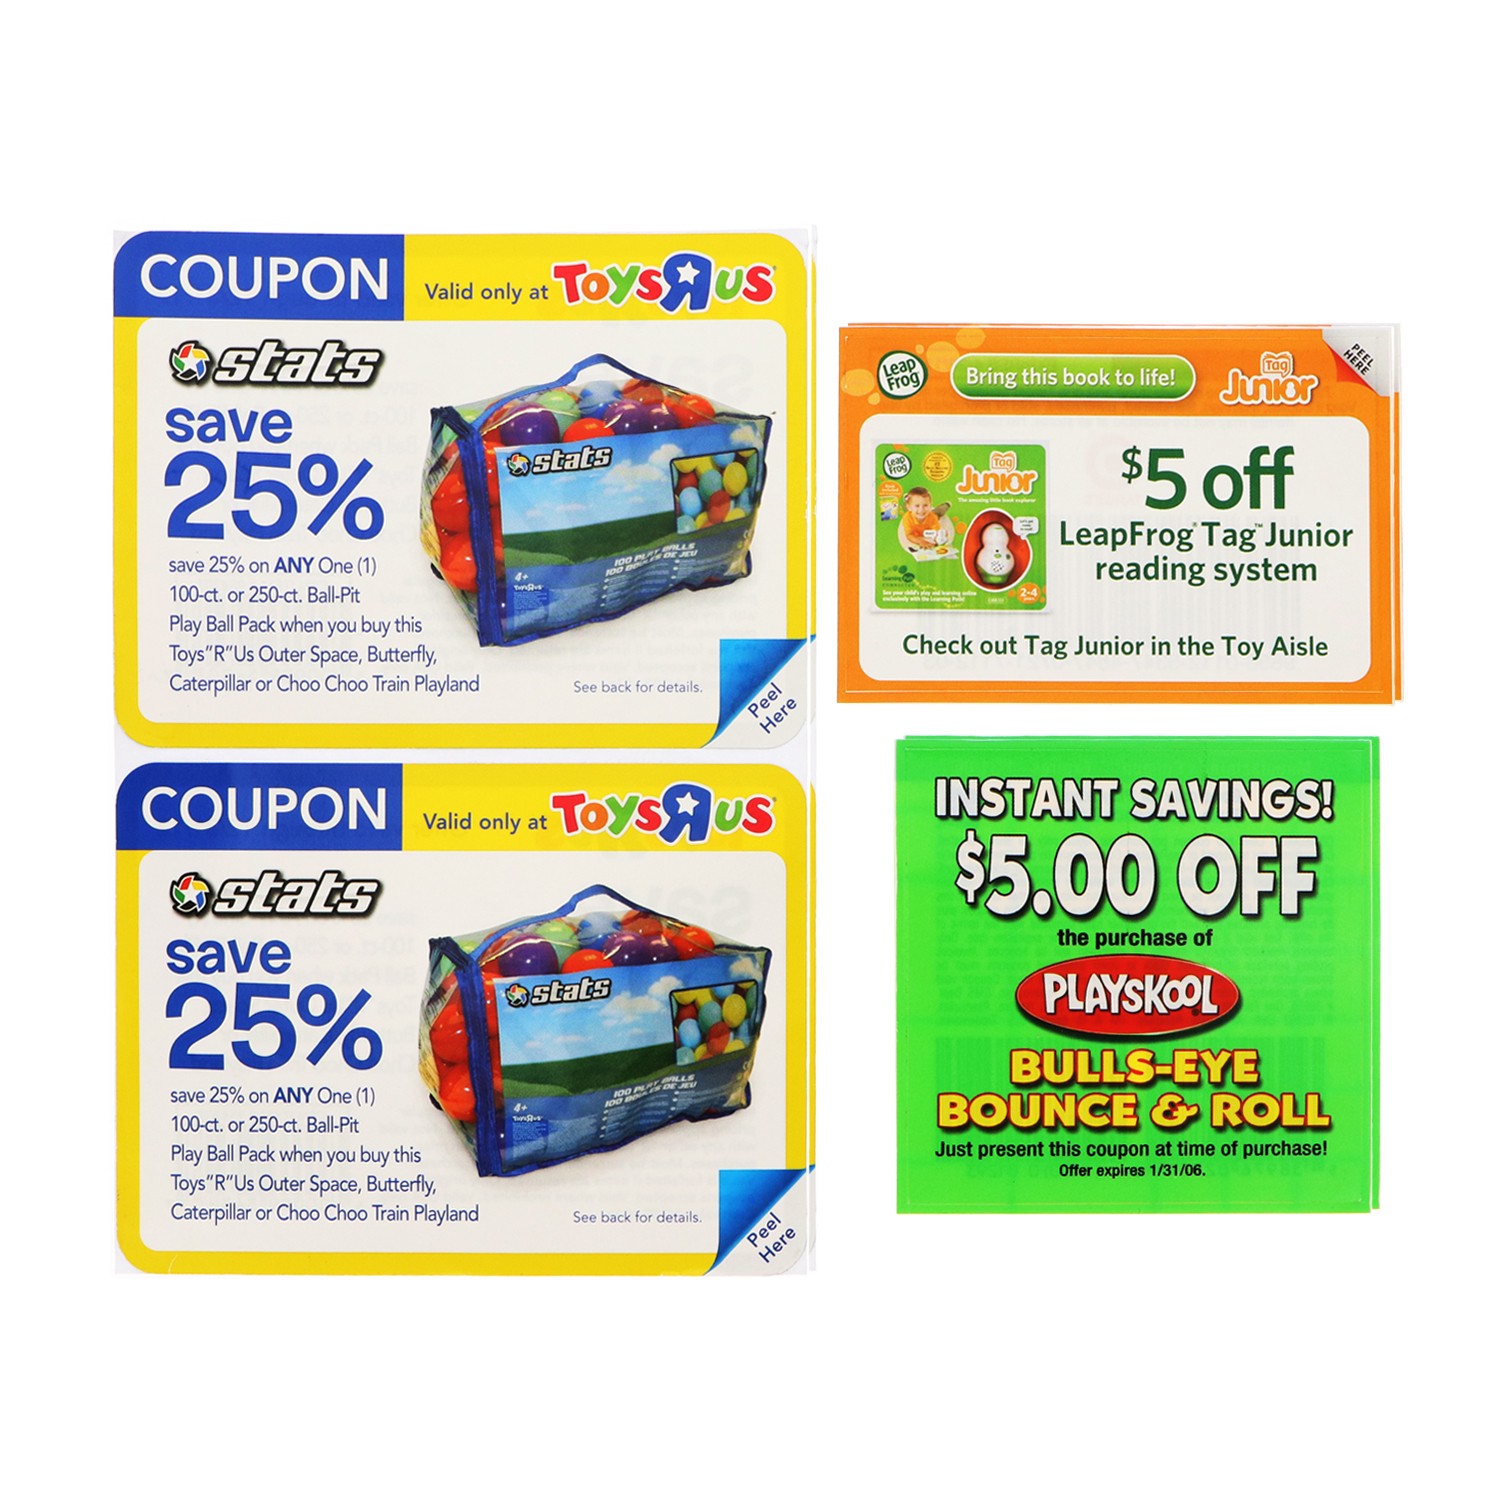 Customized Coupons and Instant Redeemable Coupons for Advertising and Promotion Campaigns